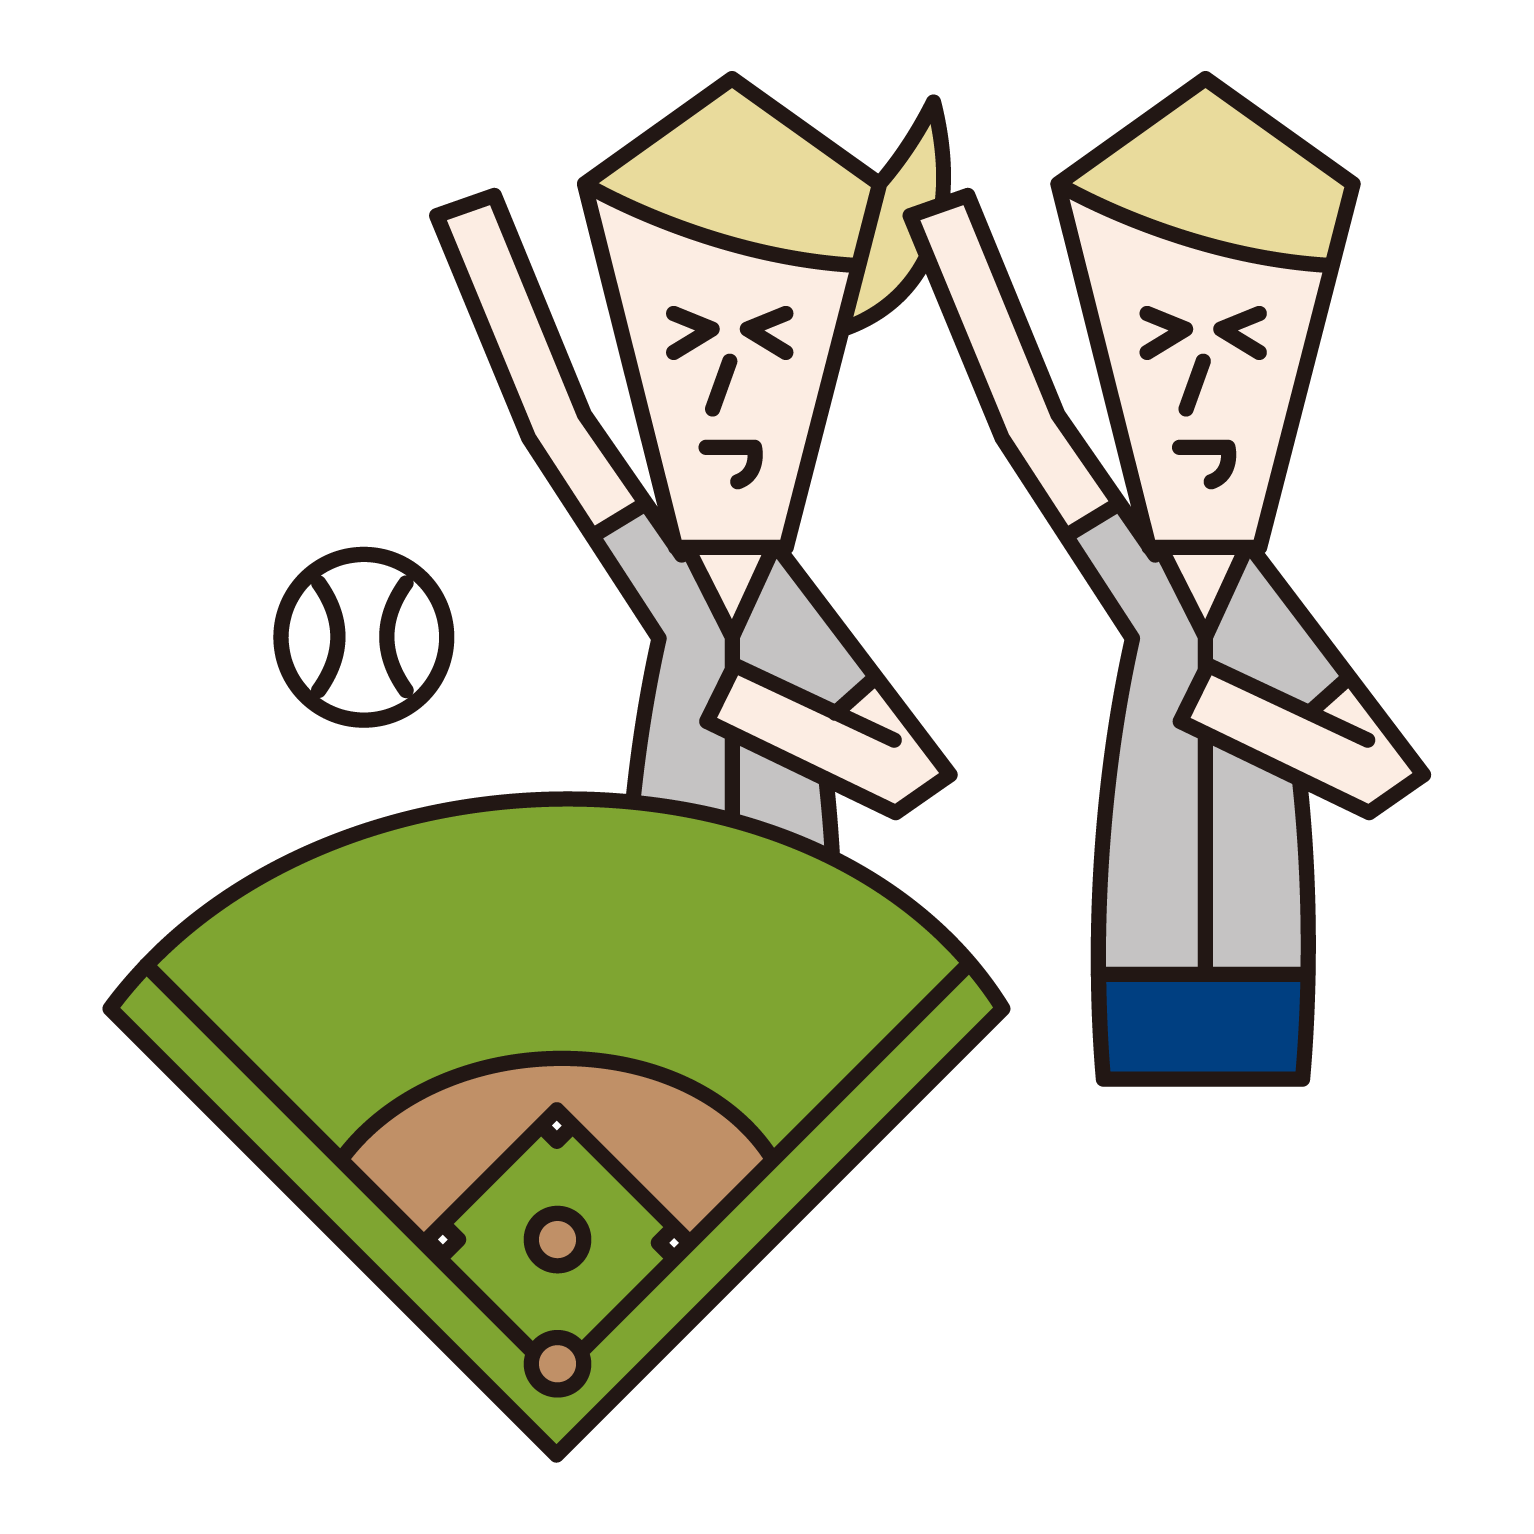 Illustration of people watching a baseball game